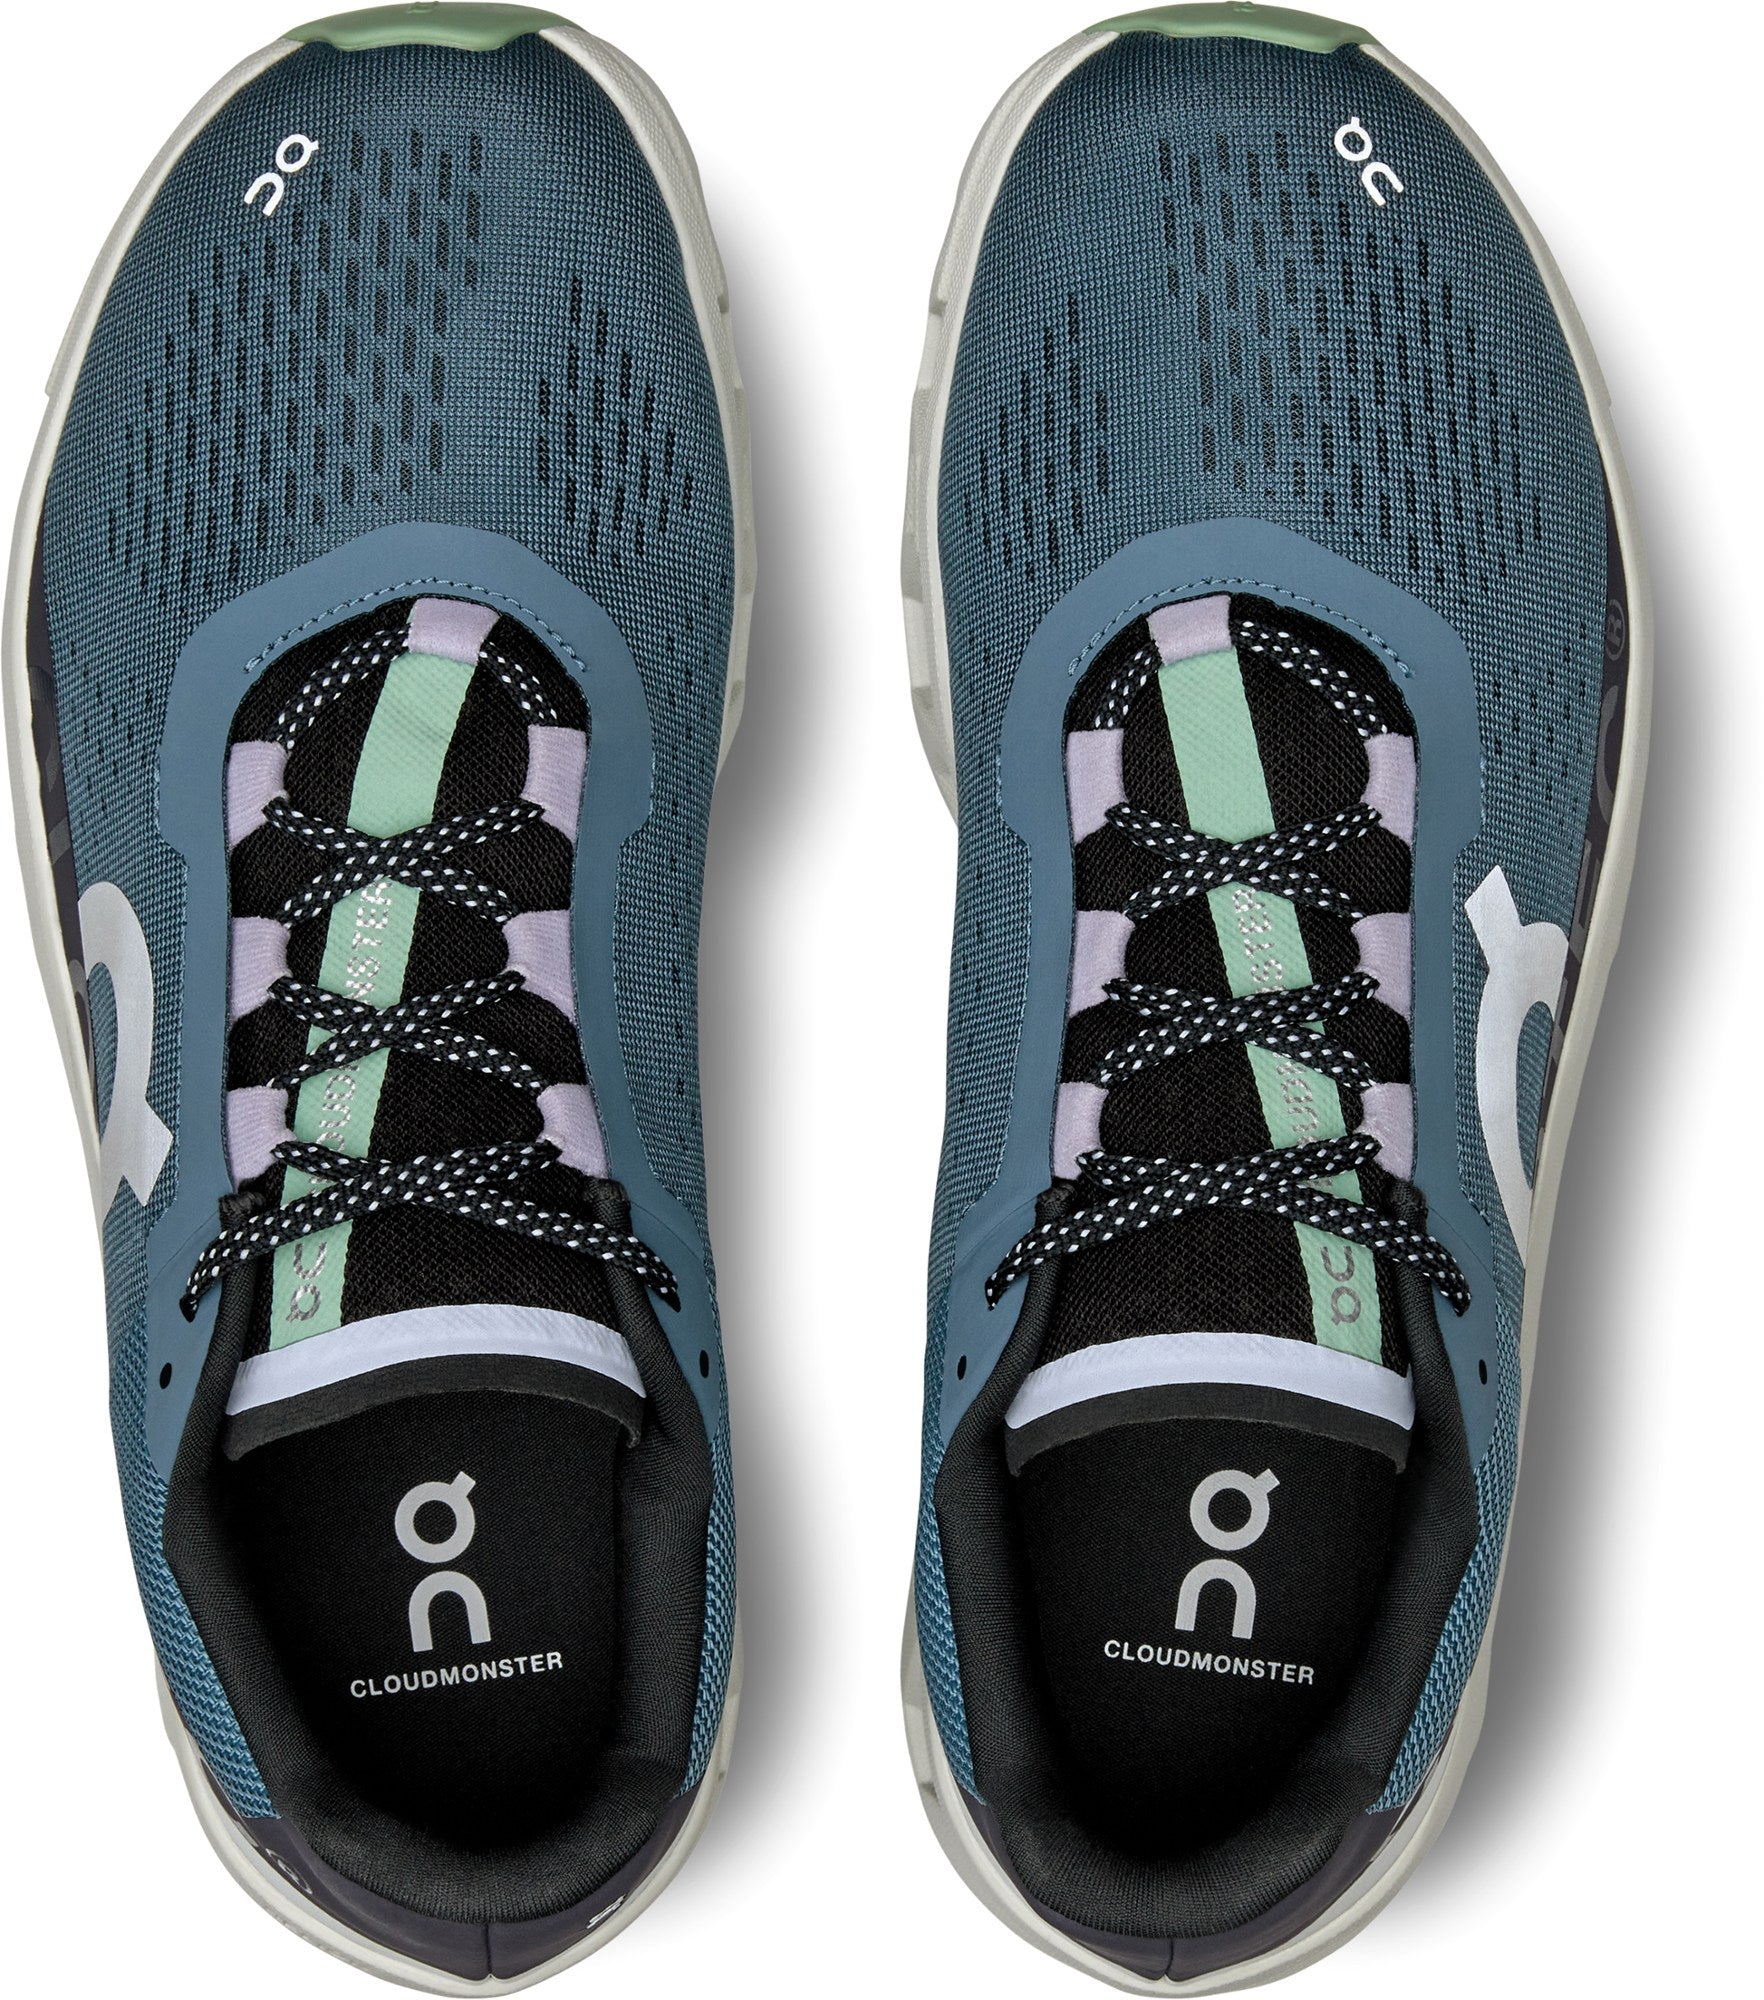 On Cloudstratus 3 Running Shoes - Men's